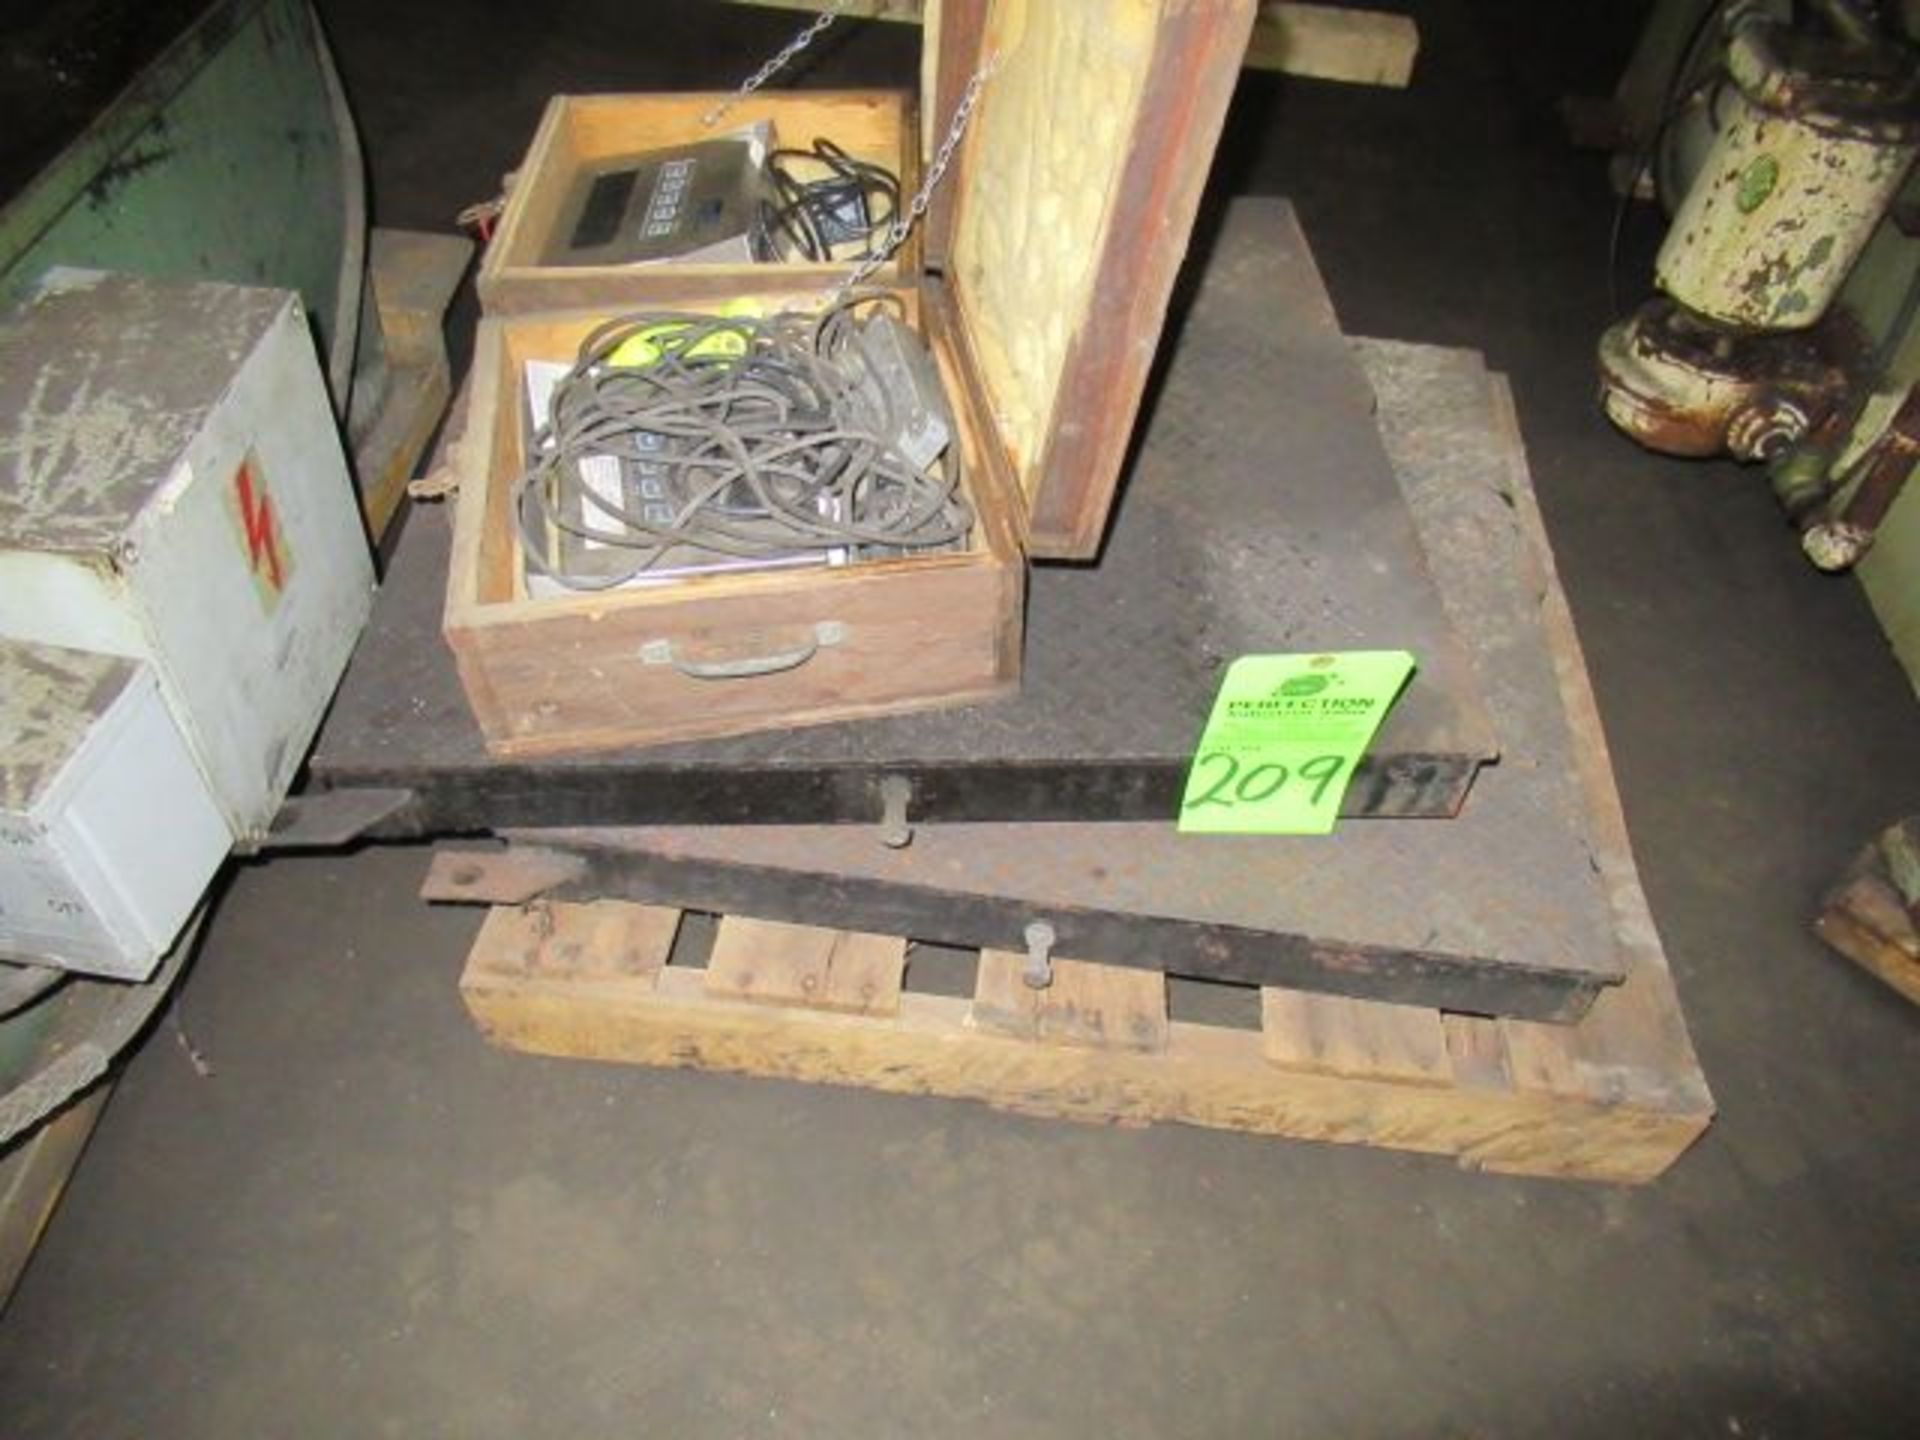 Lot. (2) 24 x 24" Platform Scales w/ Read Out ($50 Rigging Cost) - Image 2 of 4